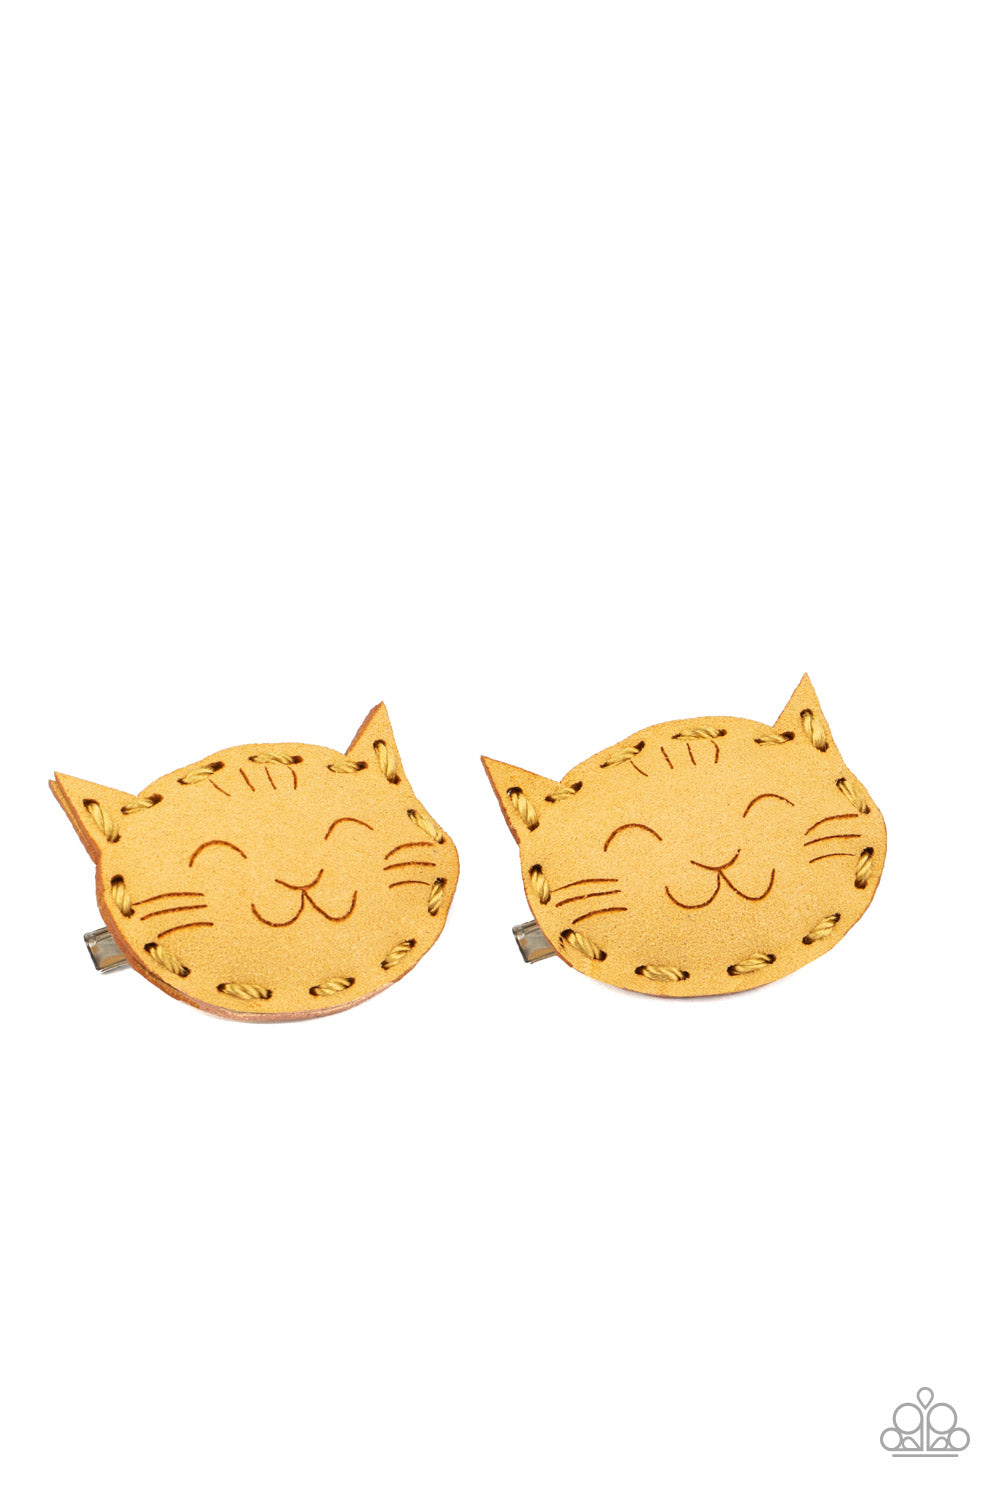 &lt;P&gt;Pieces of suede are delicately cut and stitched into a puffy pair of cats. Features standard hair clips on the back.&lt;/P&gt;

&lt;P&gt;&lt;I&gt;Sold as one individual hair clip.&lt;/I&gt;&lt;/P&gt;


&lt;img src=\&quot;https://d9b54x484lq62.cloudfront.net/paparazzi/shopping/images/517_tag150x115_1.png\&quot; alt=\&quot;New Kit\&quot; align=\&quot;middle\&quot; height=\&quot;50\&quot; width=\&quot;50\&quot;/&gt;